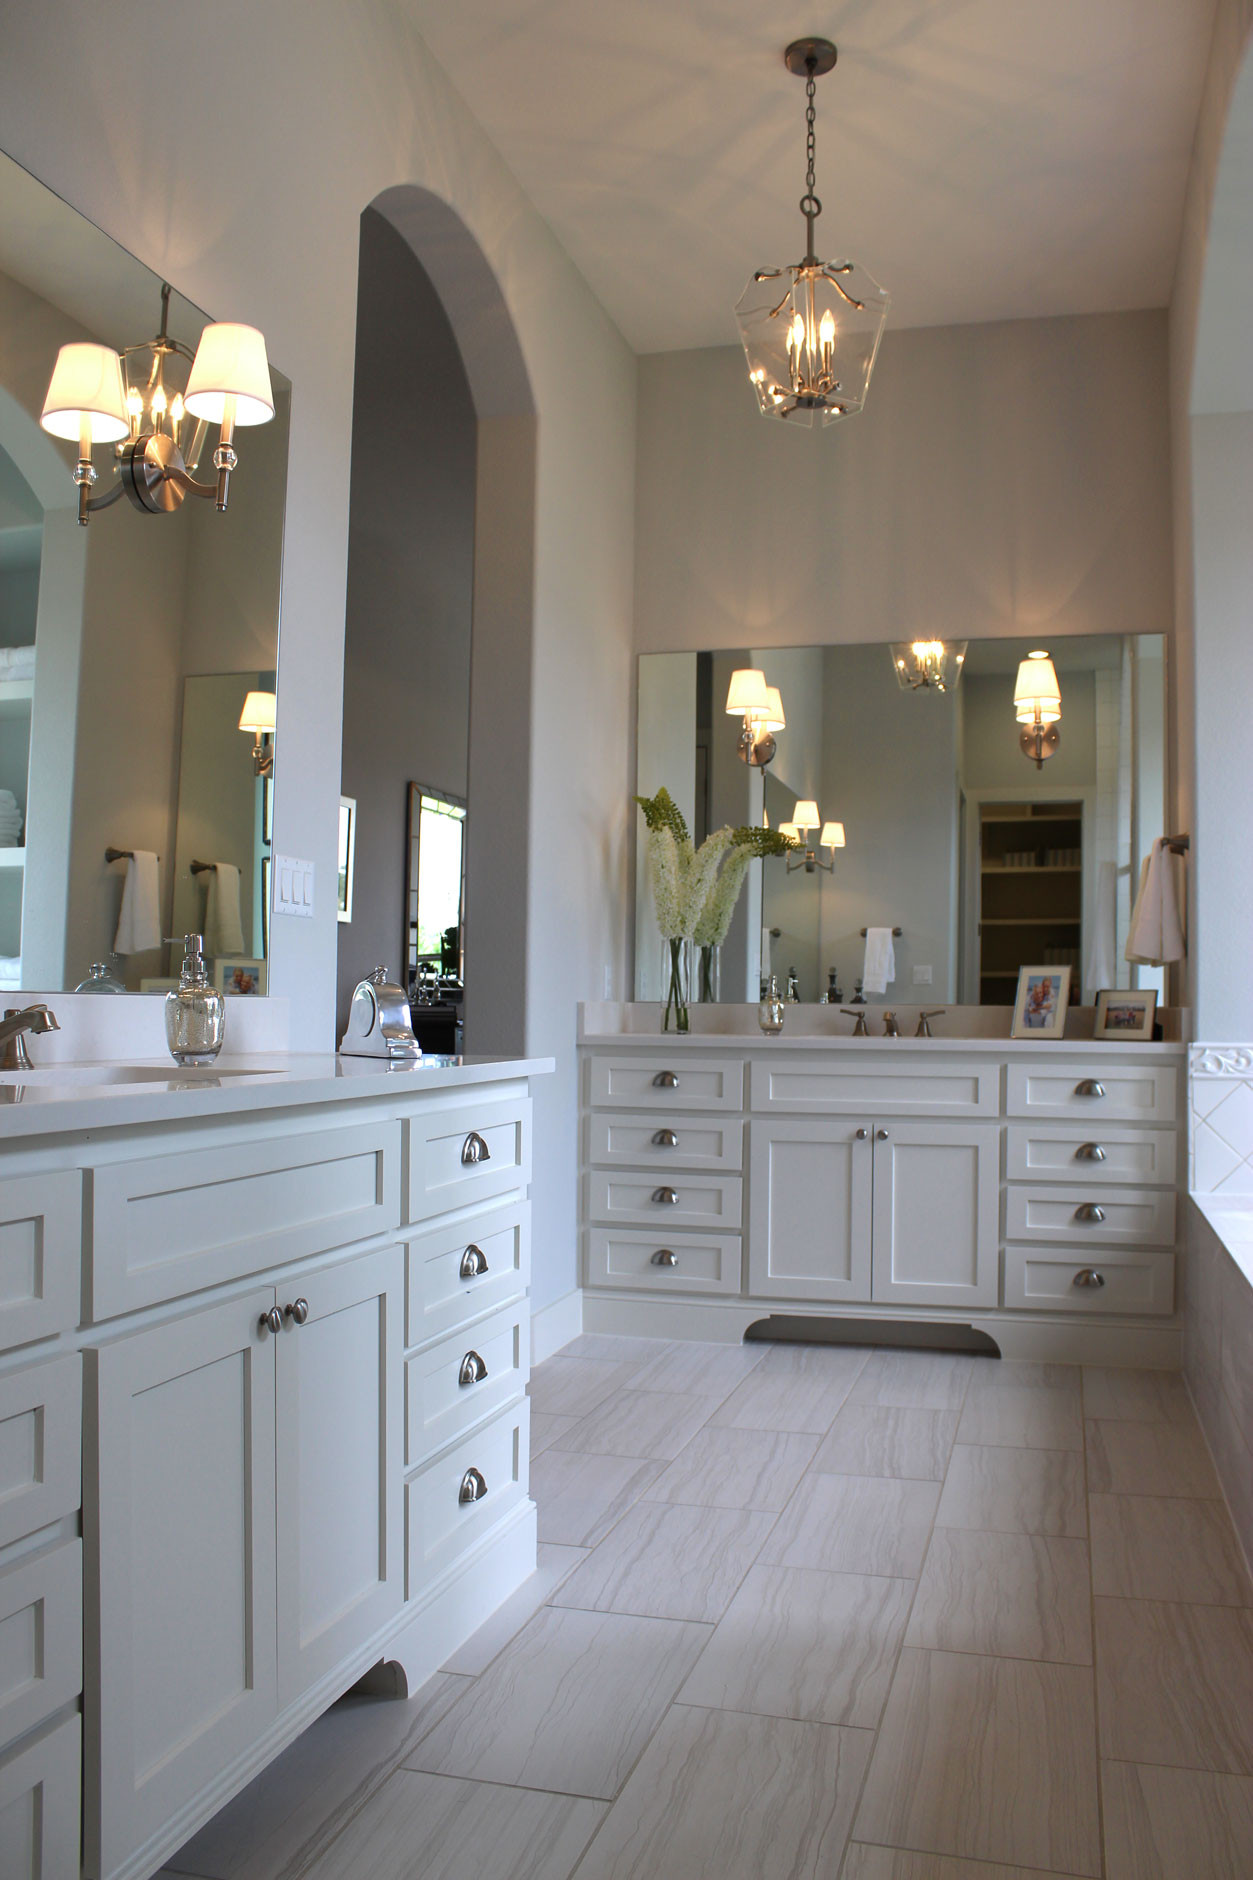 Master Bathroom Cabinets
 Kitchen and bath cabinet door news by TaylorCraft Cabinet